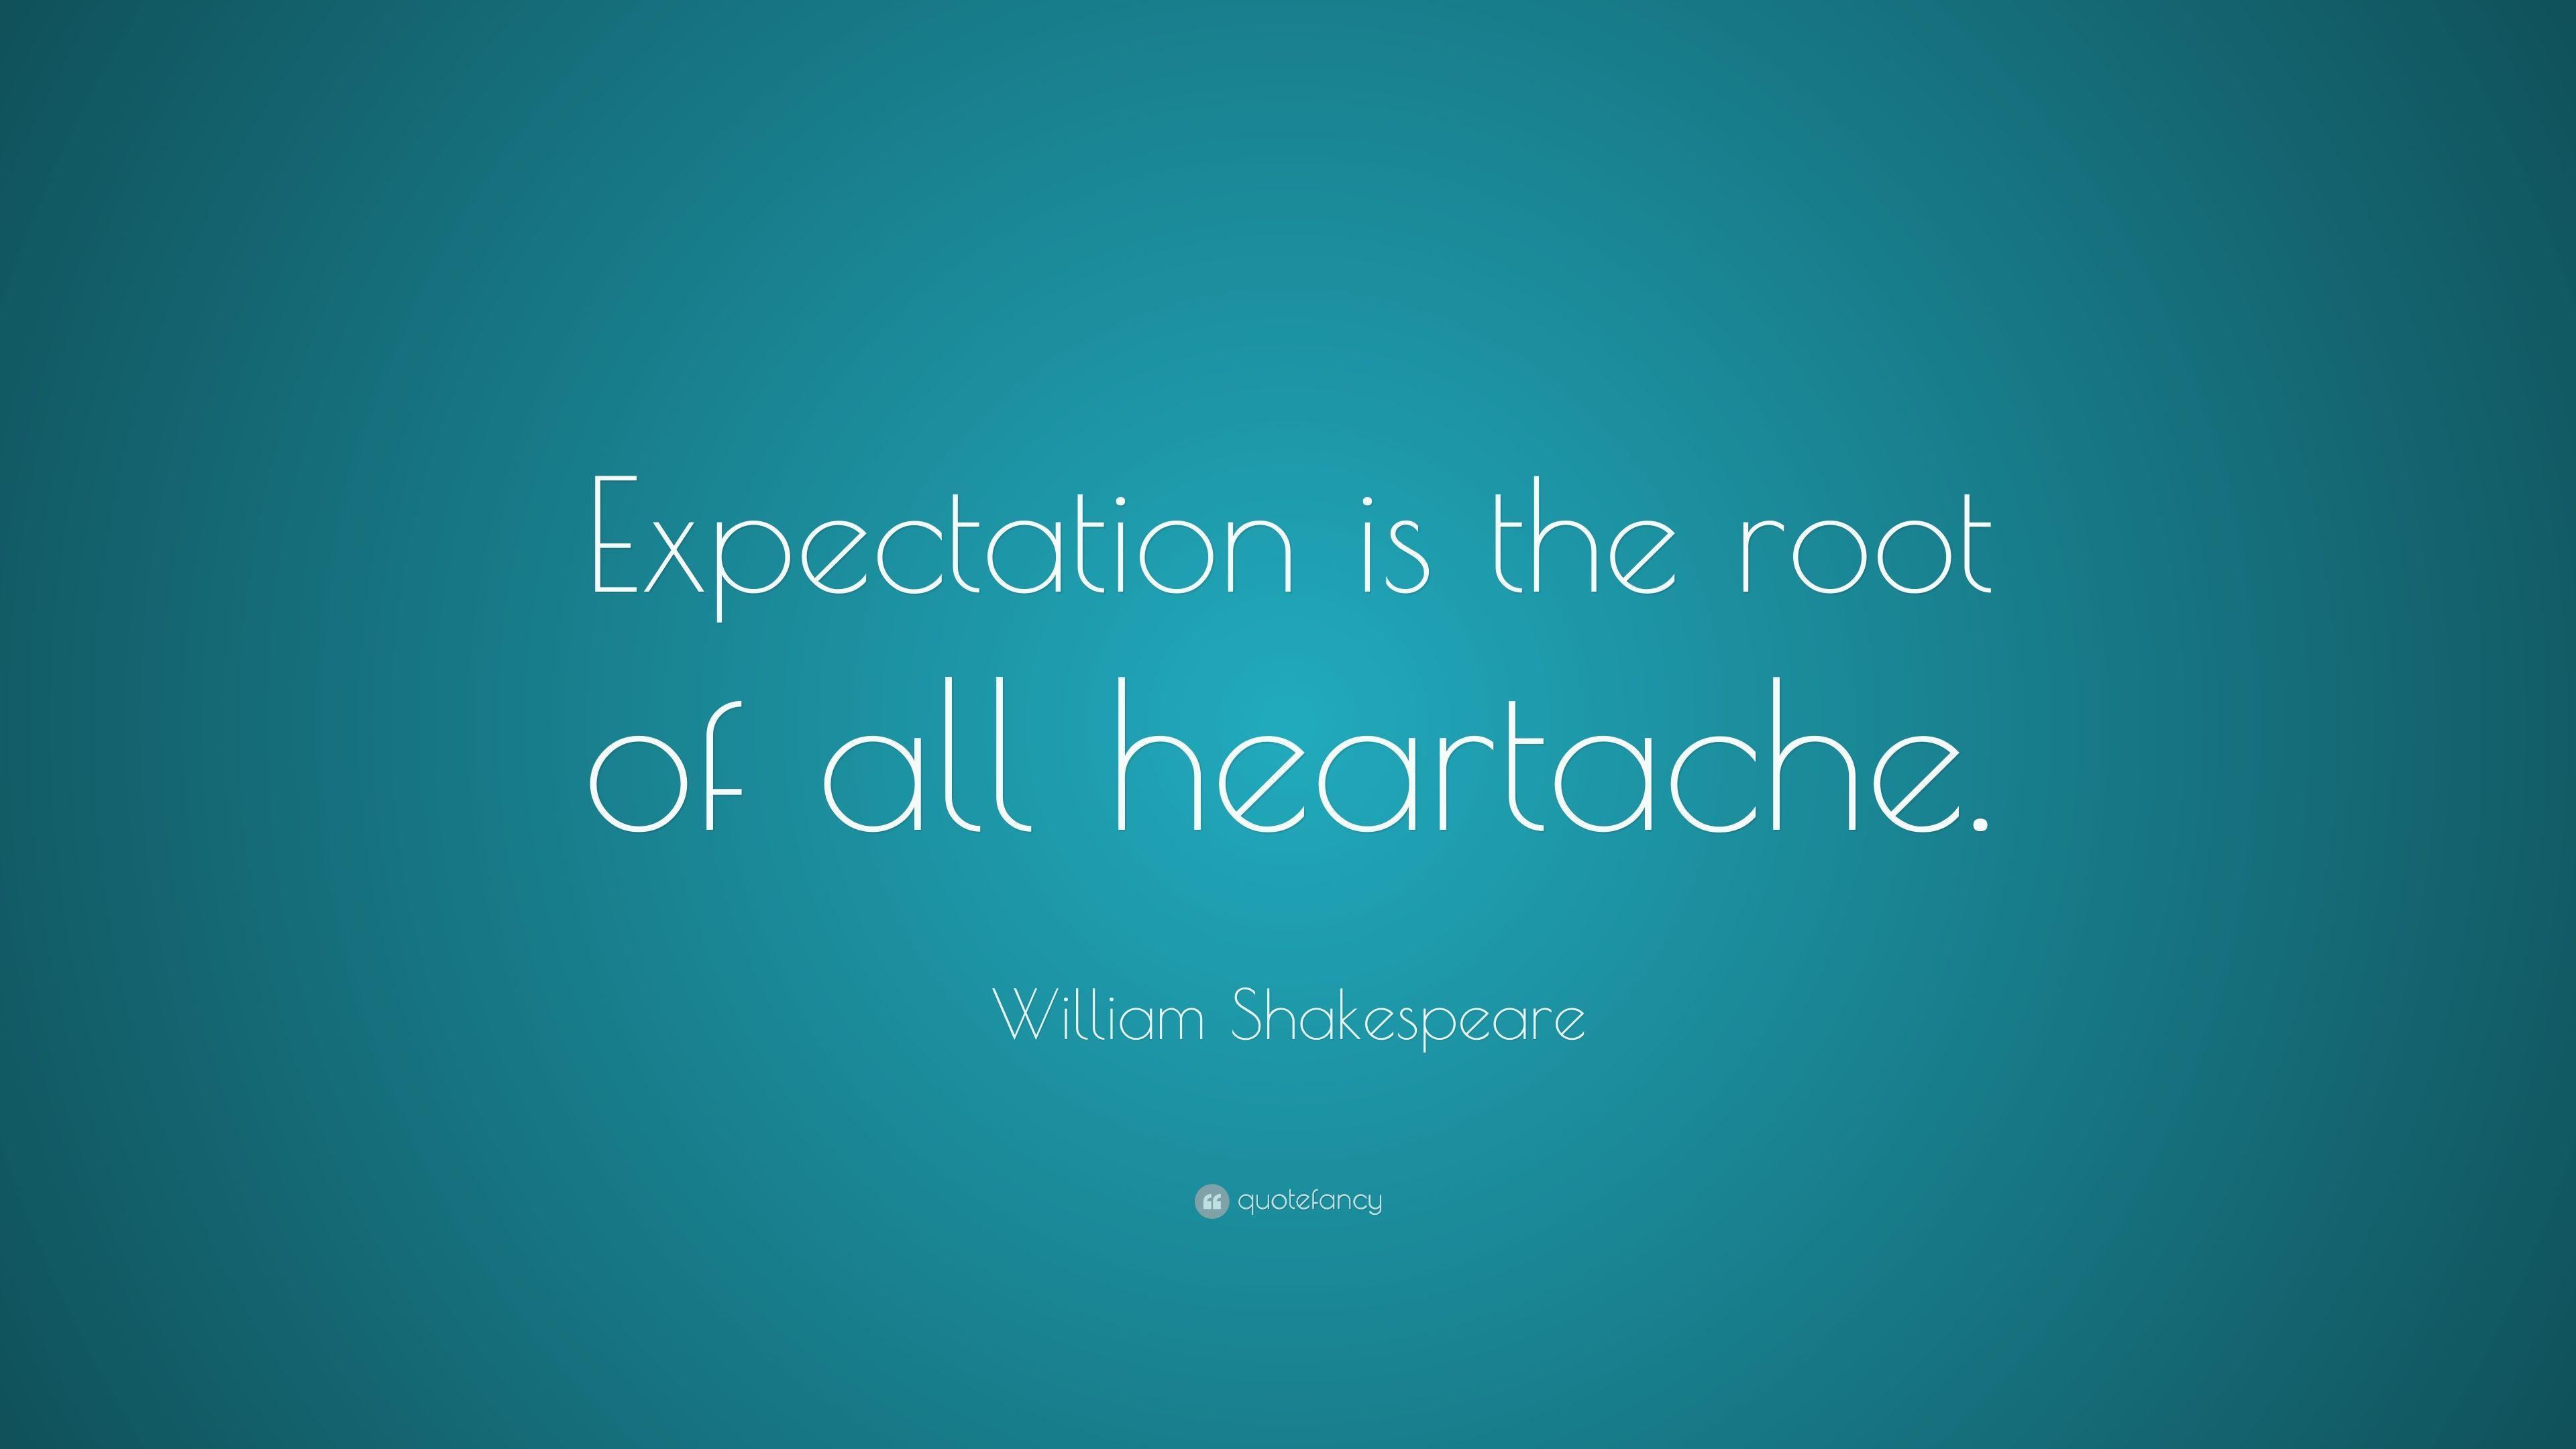 William Shakespeare Quote: “Expectation is the root of all